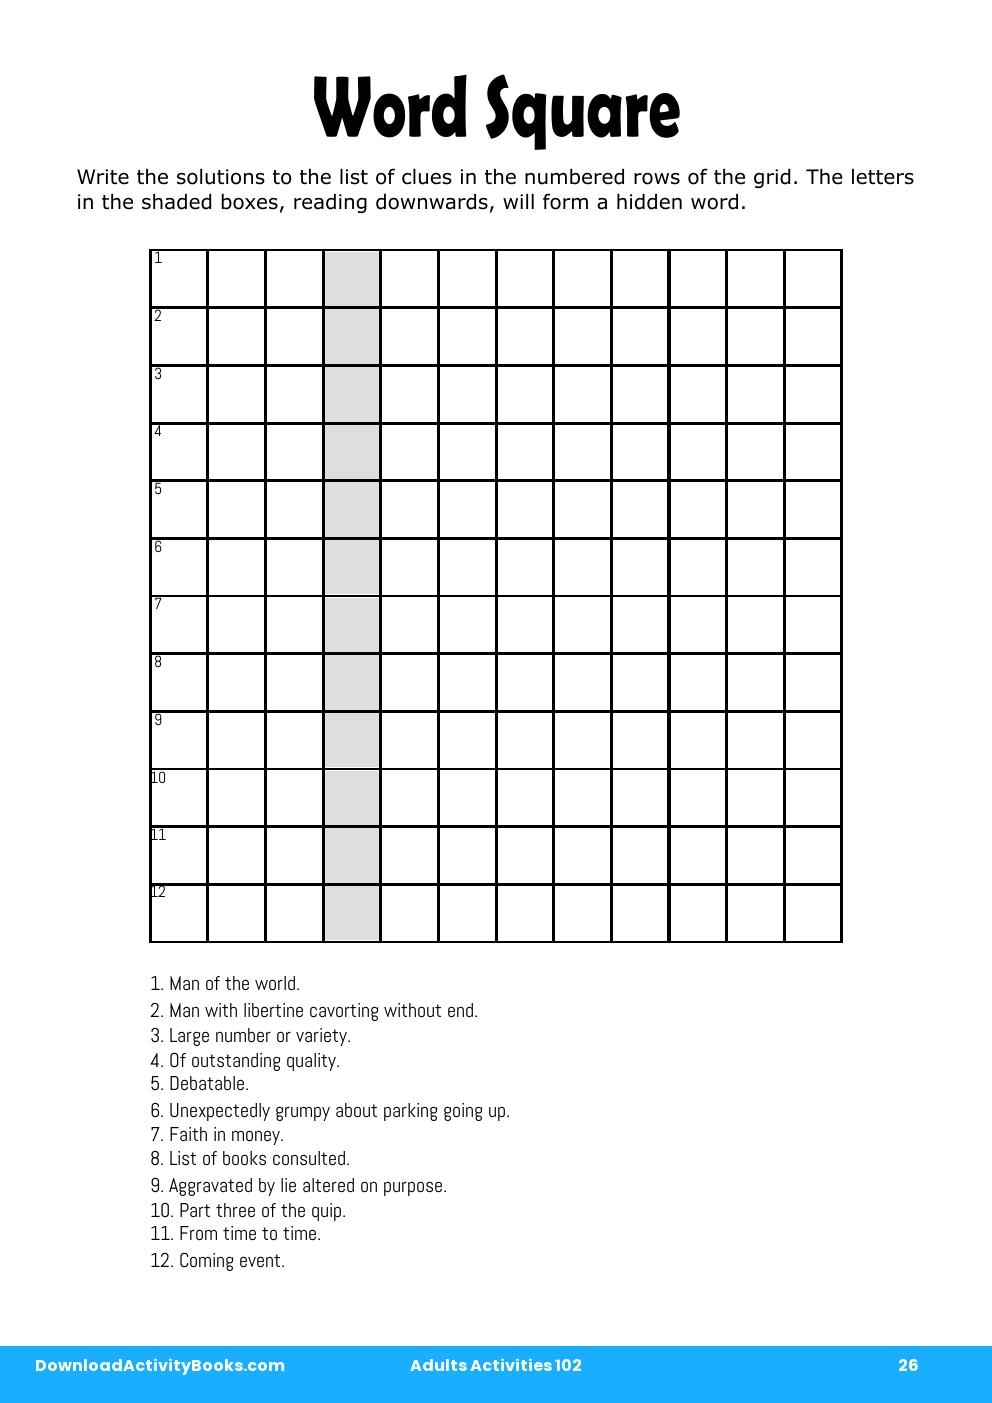 Word Square in Adults Activities 102